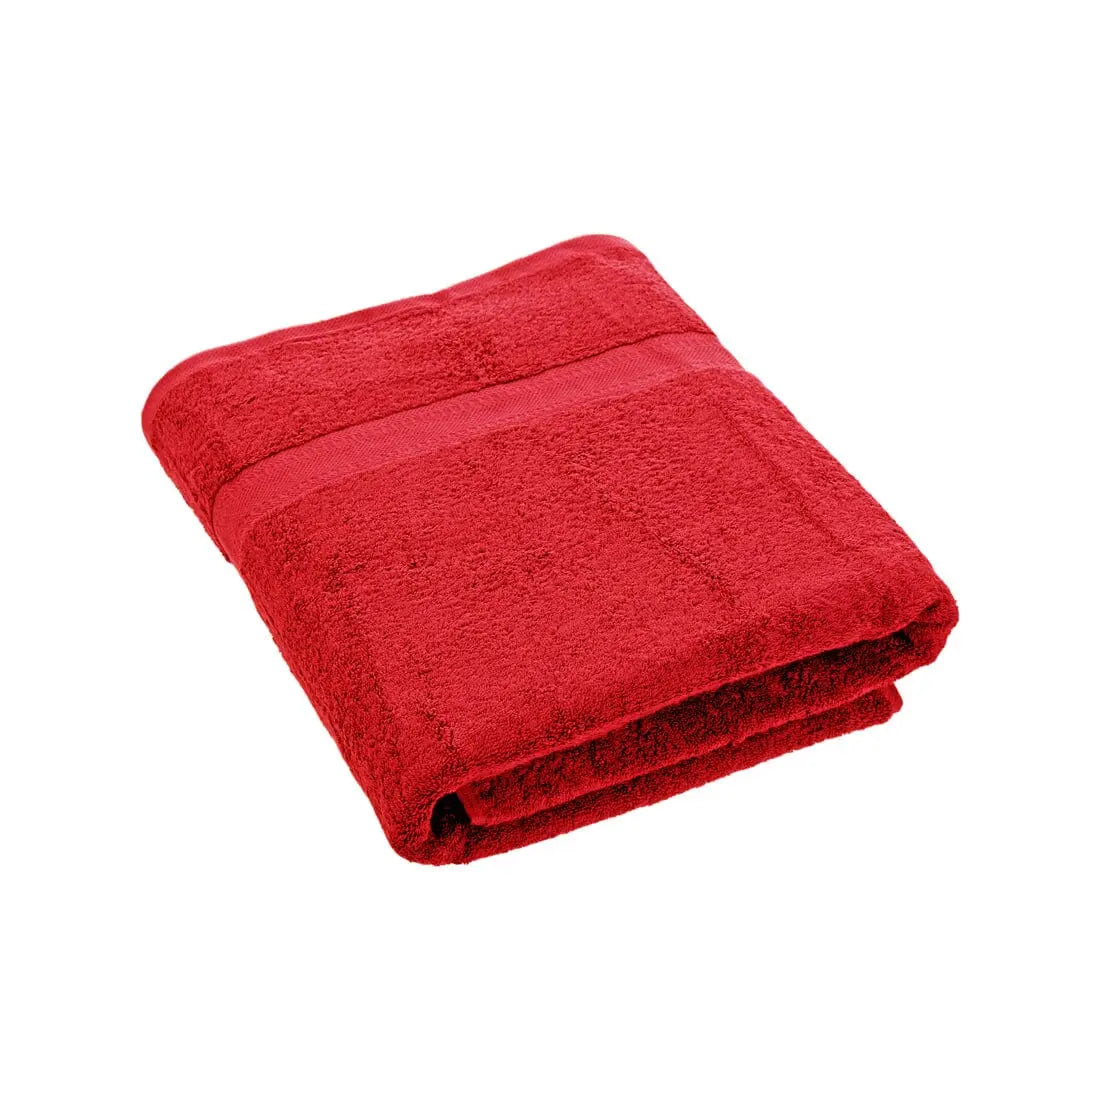 towel in red